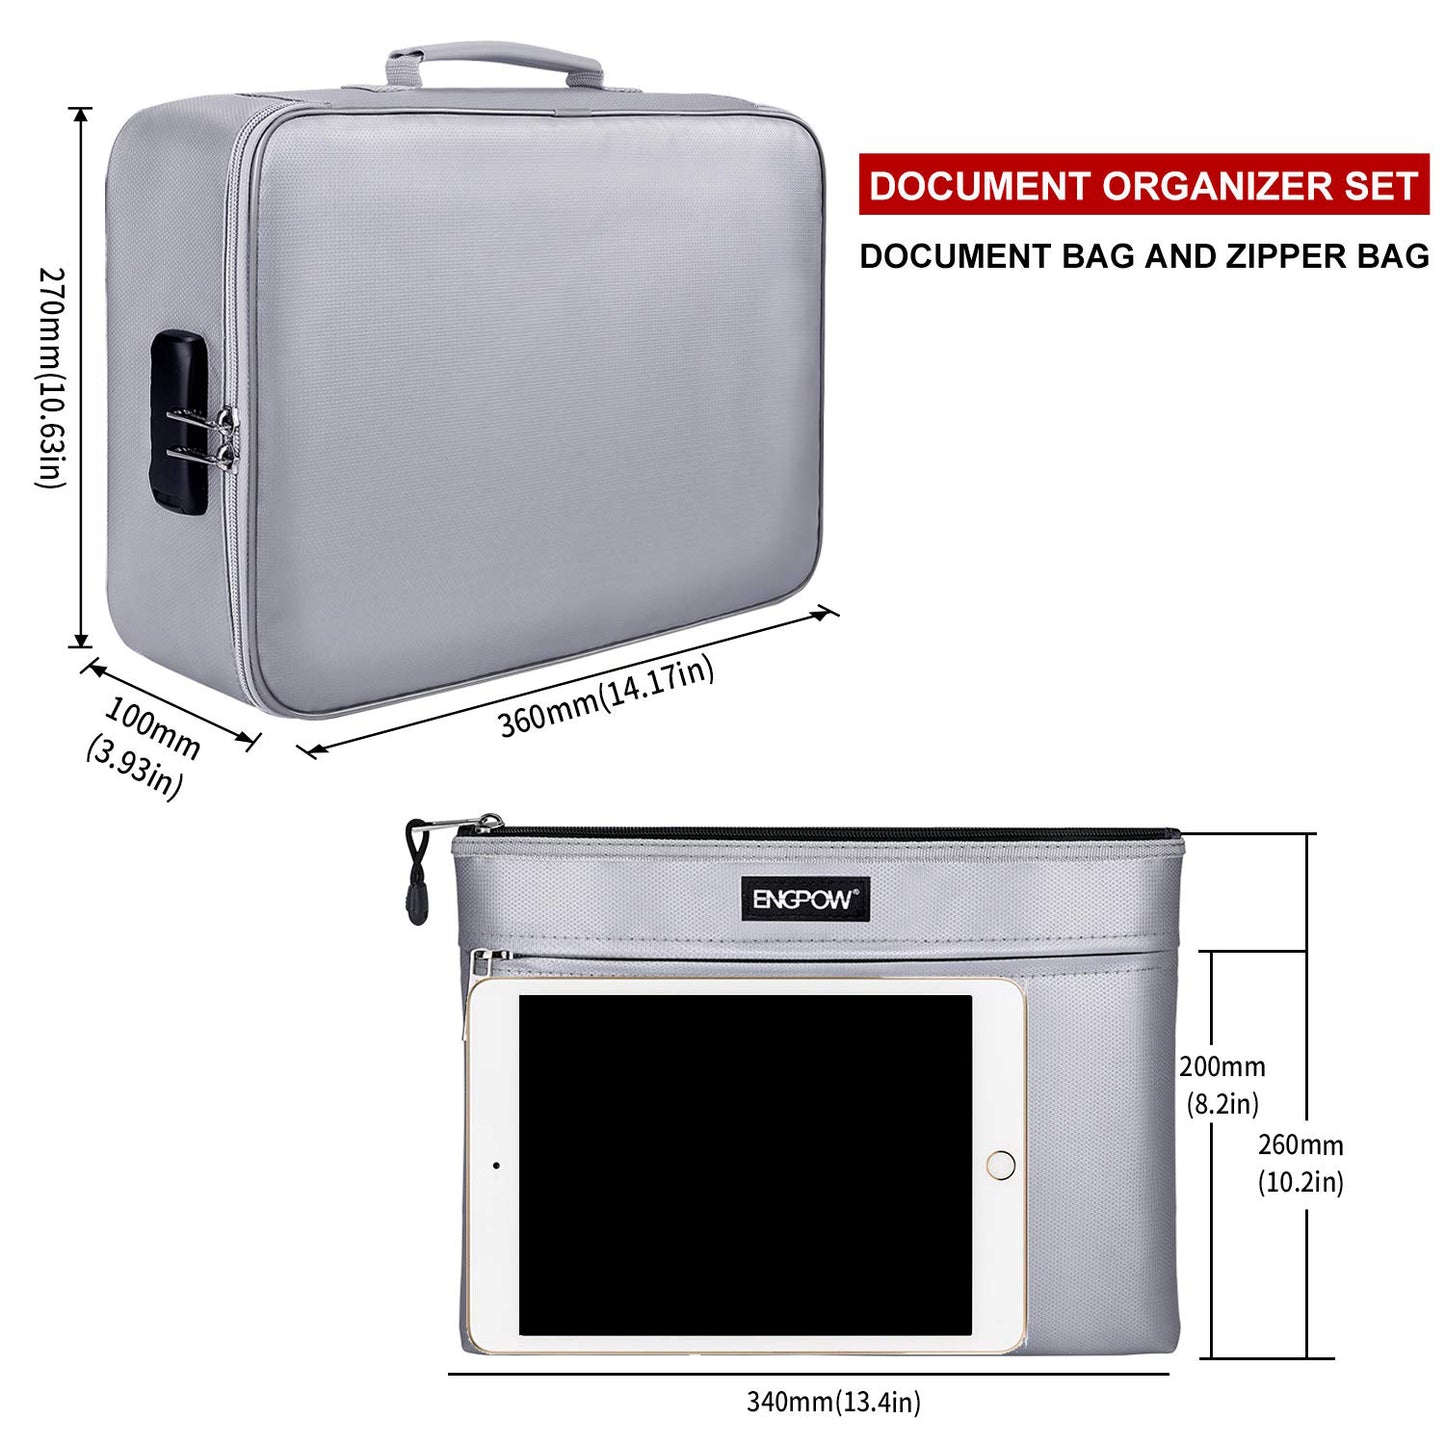 ENGPOW 600°F Fireproof Document Bag with Lock, Upgraded Insulated Fireproof and Waterproof Box 8-Layer Document Storage Bag, Portable Home Travel Safe Storage of Important Documents, Documents, Laptops